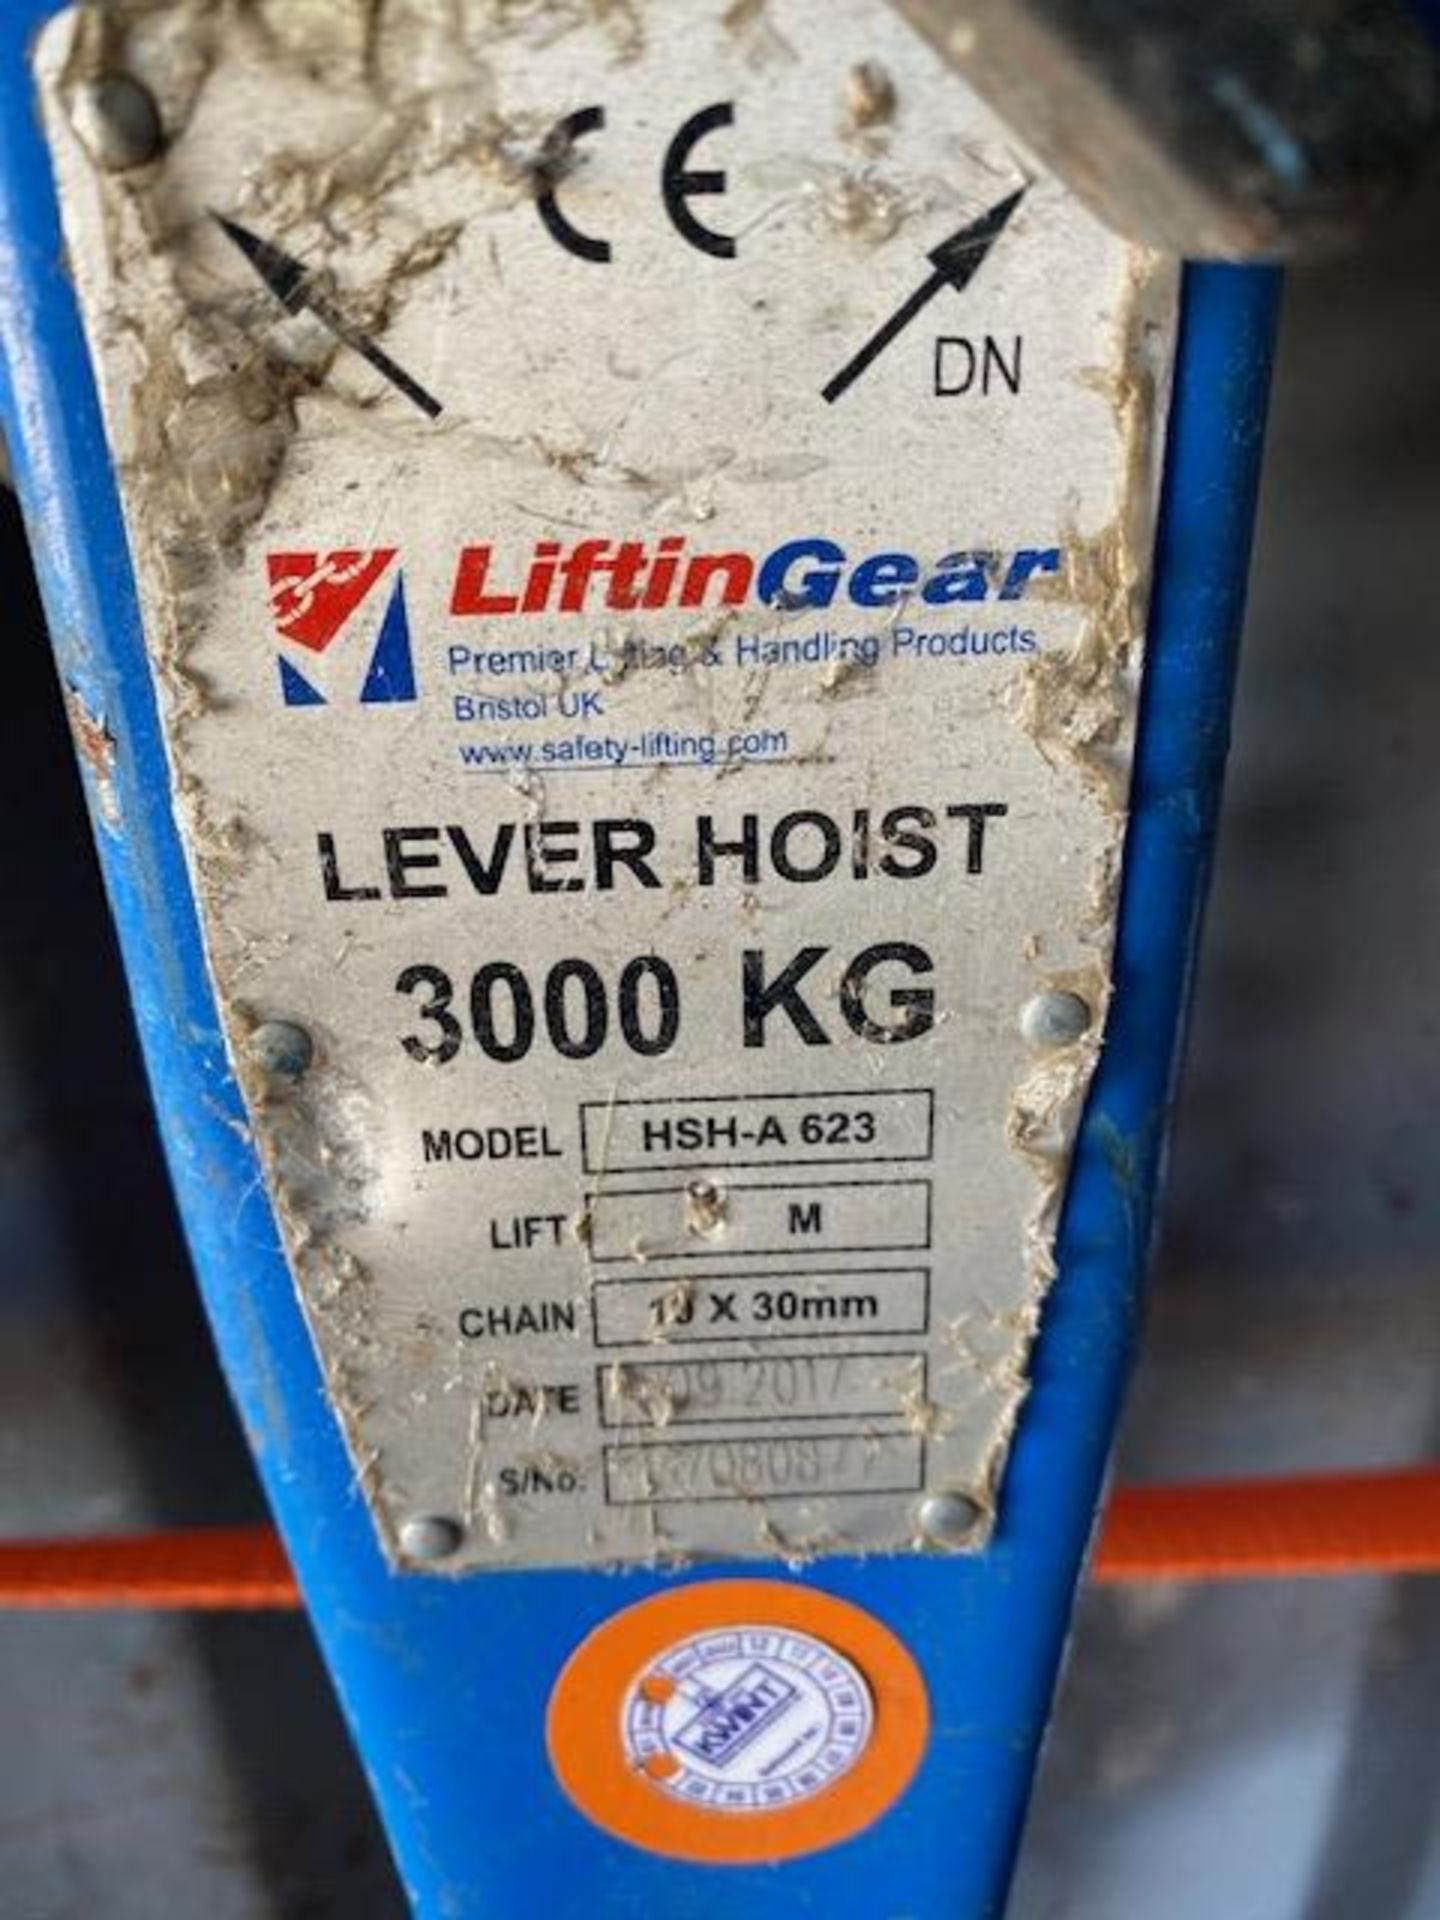 Two Lifting Gear 3000Kg Lever hoists. *N.B. This lot has no record of Thorough Examination. The - Image 2 of 3